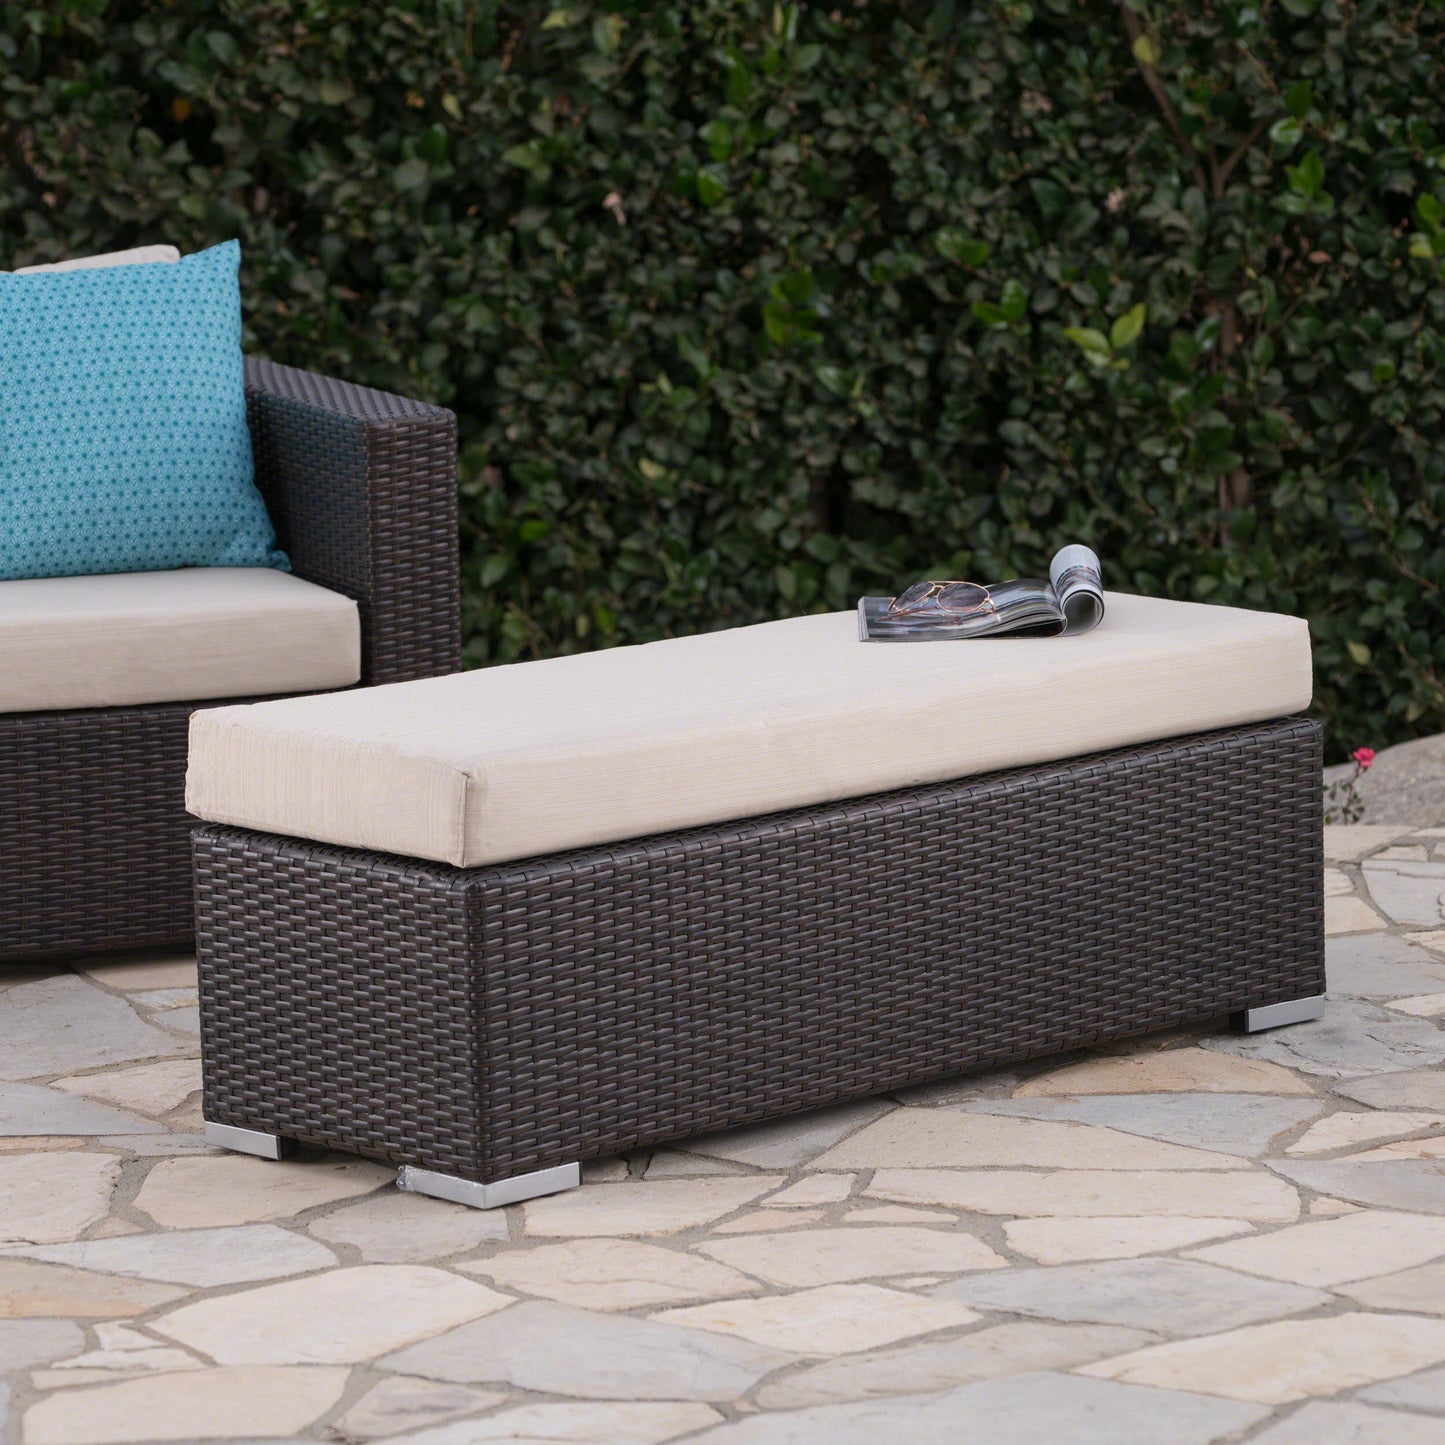 Santa Rosa Outdoor Wicker Bench with Water Resistant Cushion